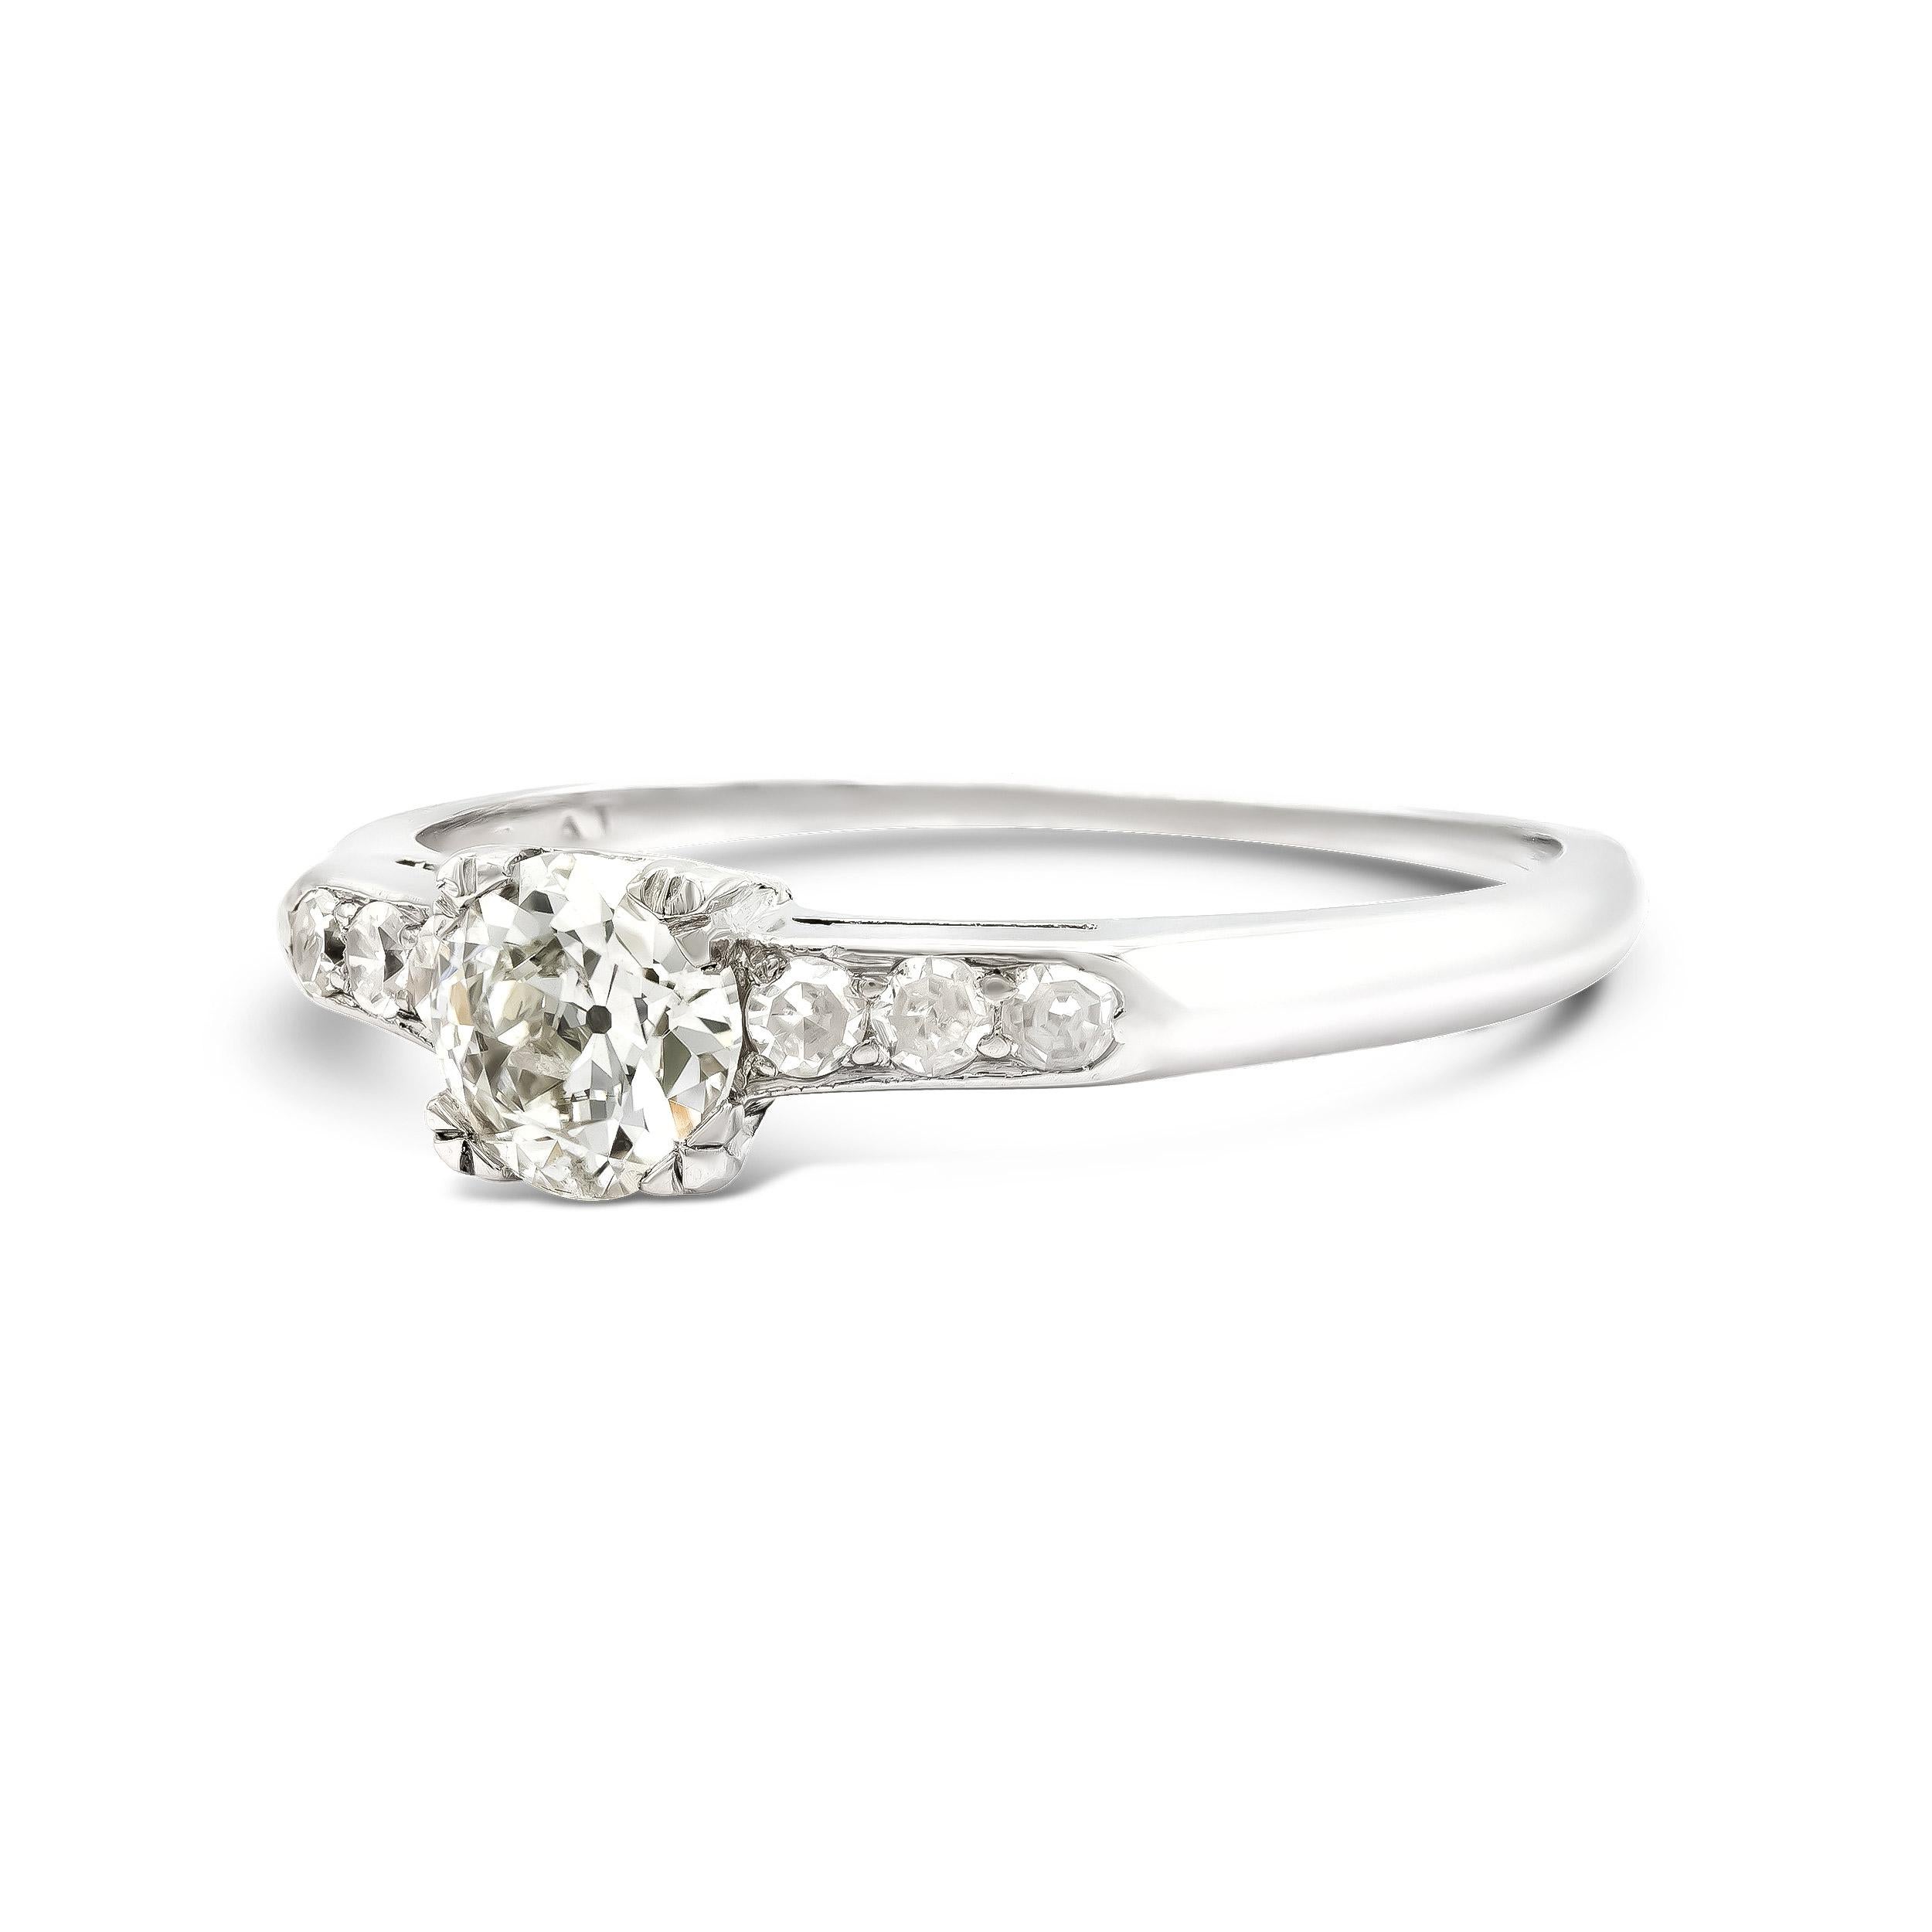 A quintessential art deco engagement ring style with so much to love. The center old Euro is as pretty as a picture, facing bright and light. We love the shouldering accent stones and the dainty platinum setting. This ring sits beautifully on the